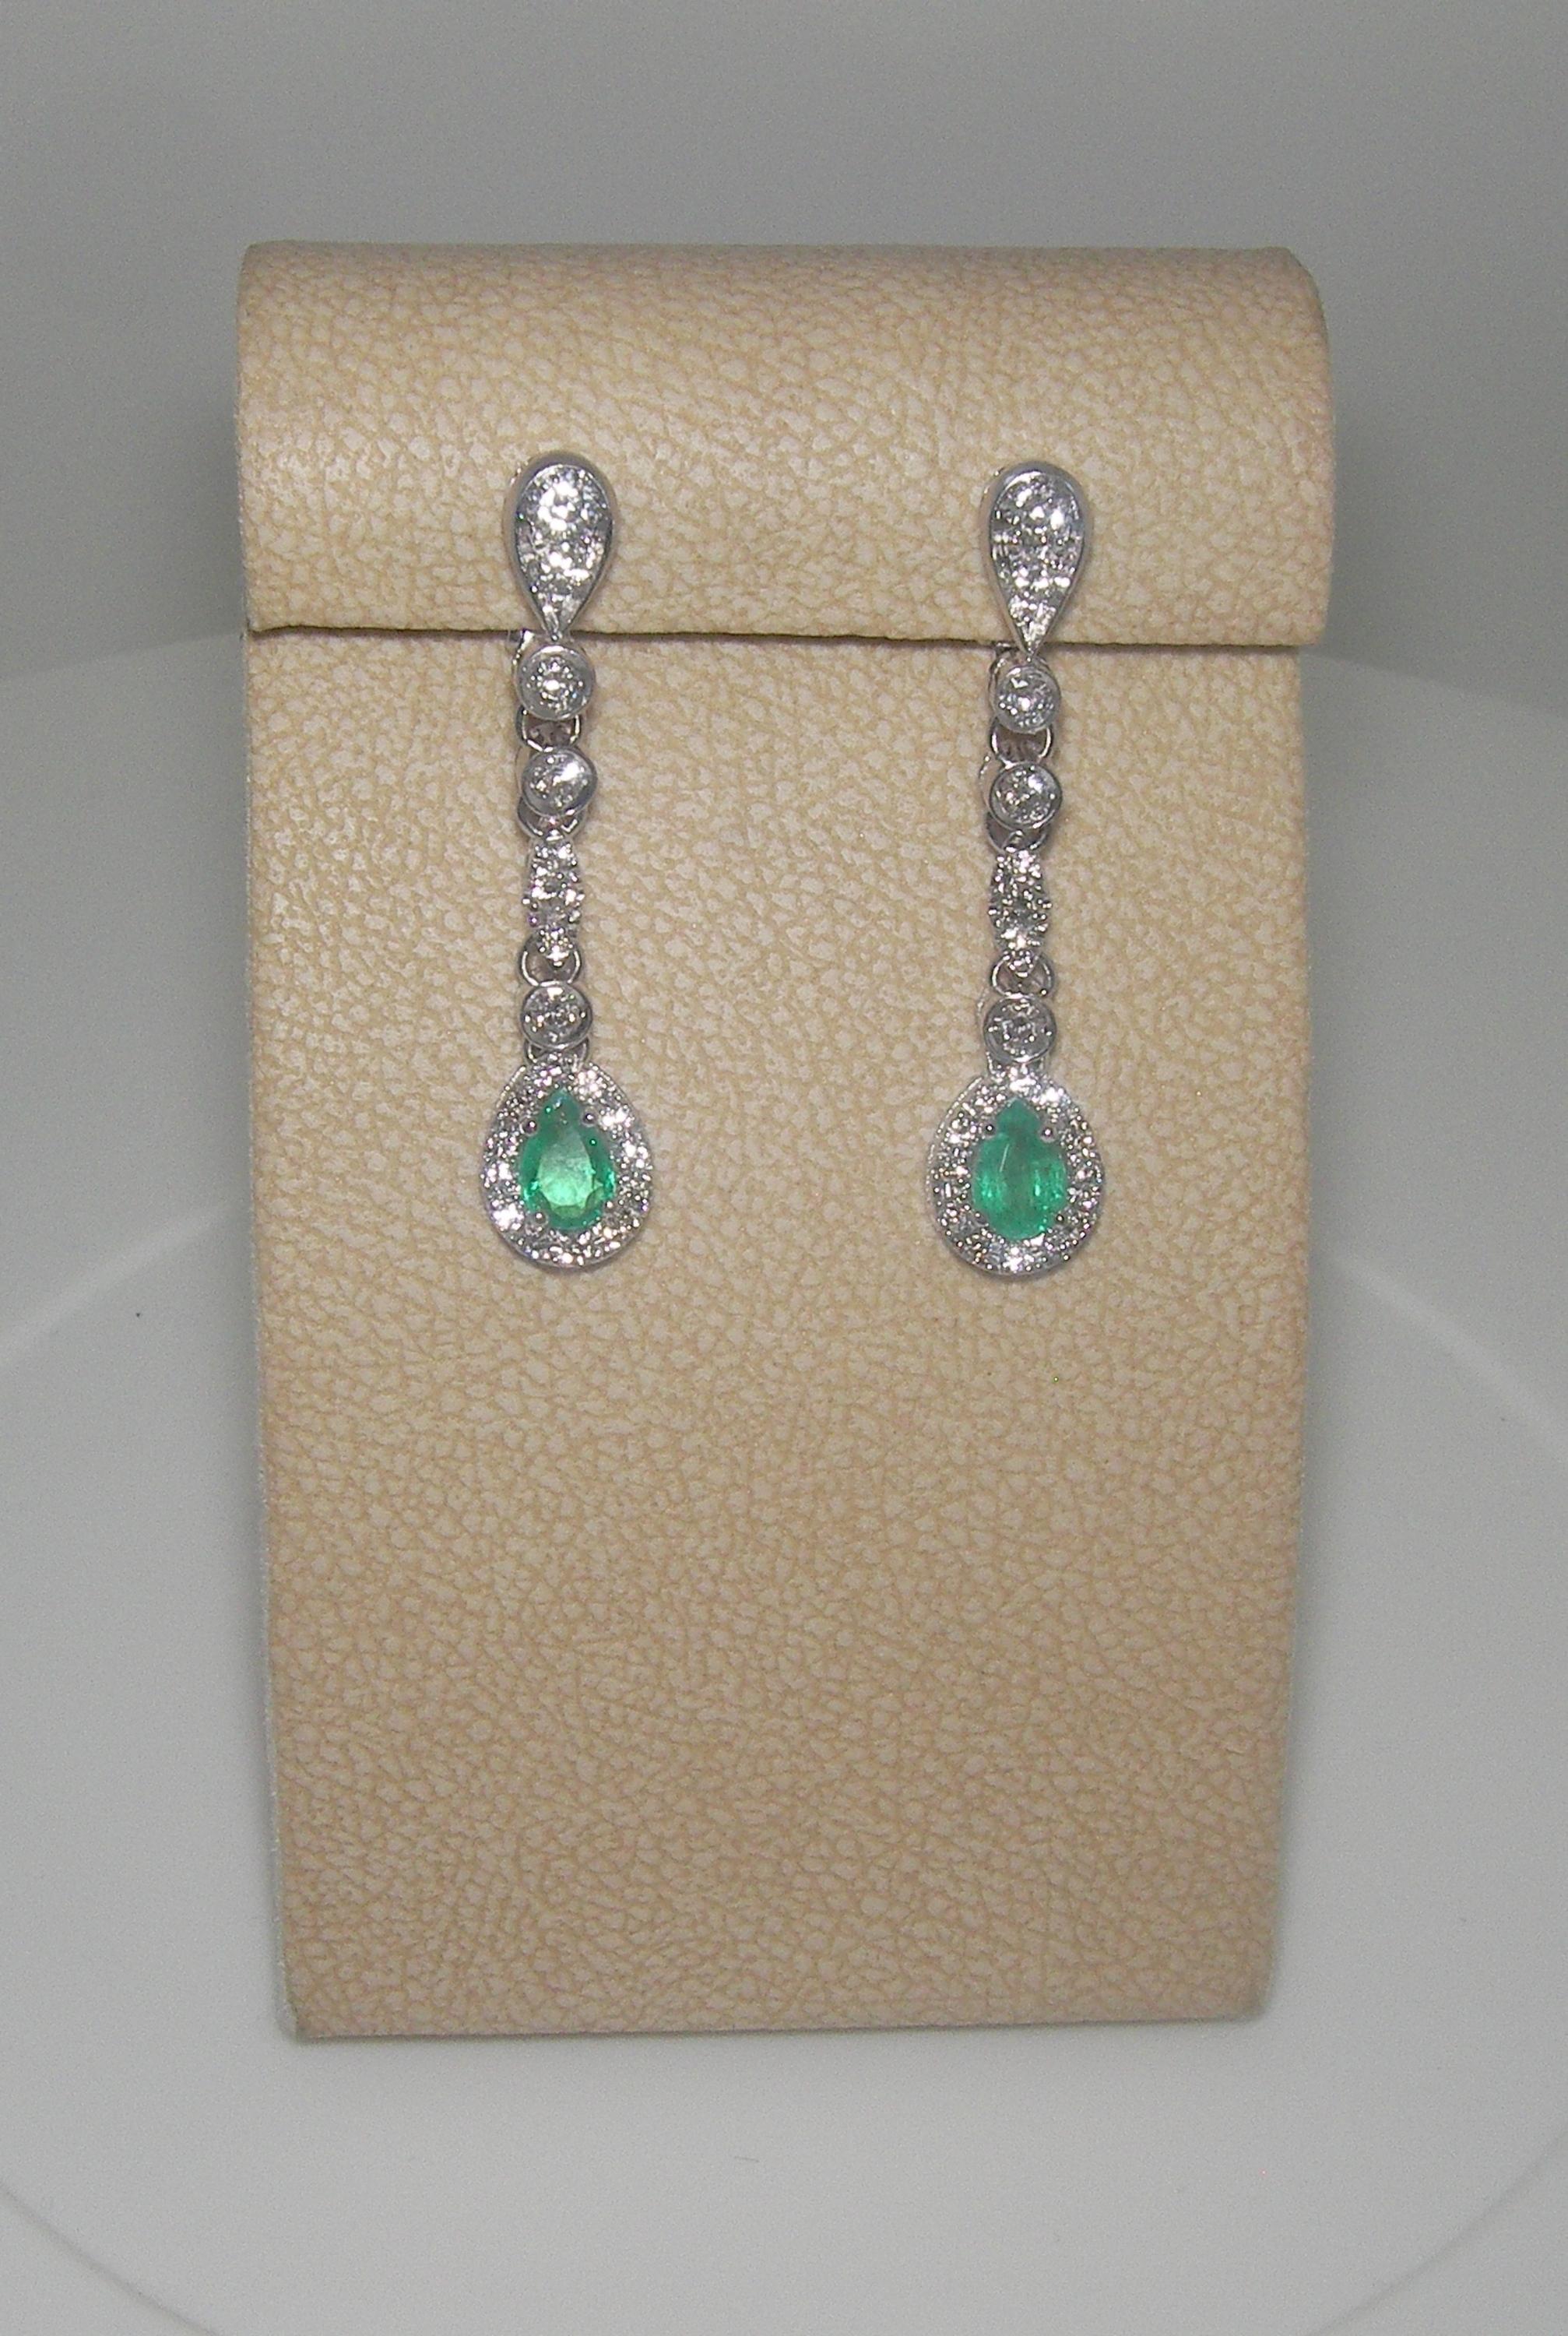 18 Karat White Gold Diamond and Emerald Dangle Earrings



2 Emerald 0,76 Carats
46  Diamonds 0,73 Carats


Founded in 1974, Gianni Lazzaro is a family-owned jewelery company based out of Düsseldorf, Germany.
Although rooted in Germany, Gianni